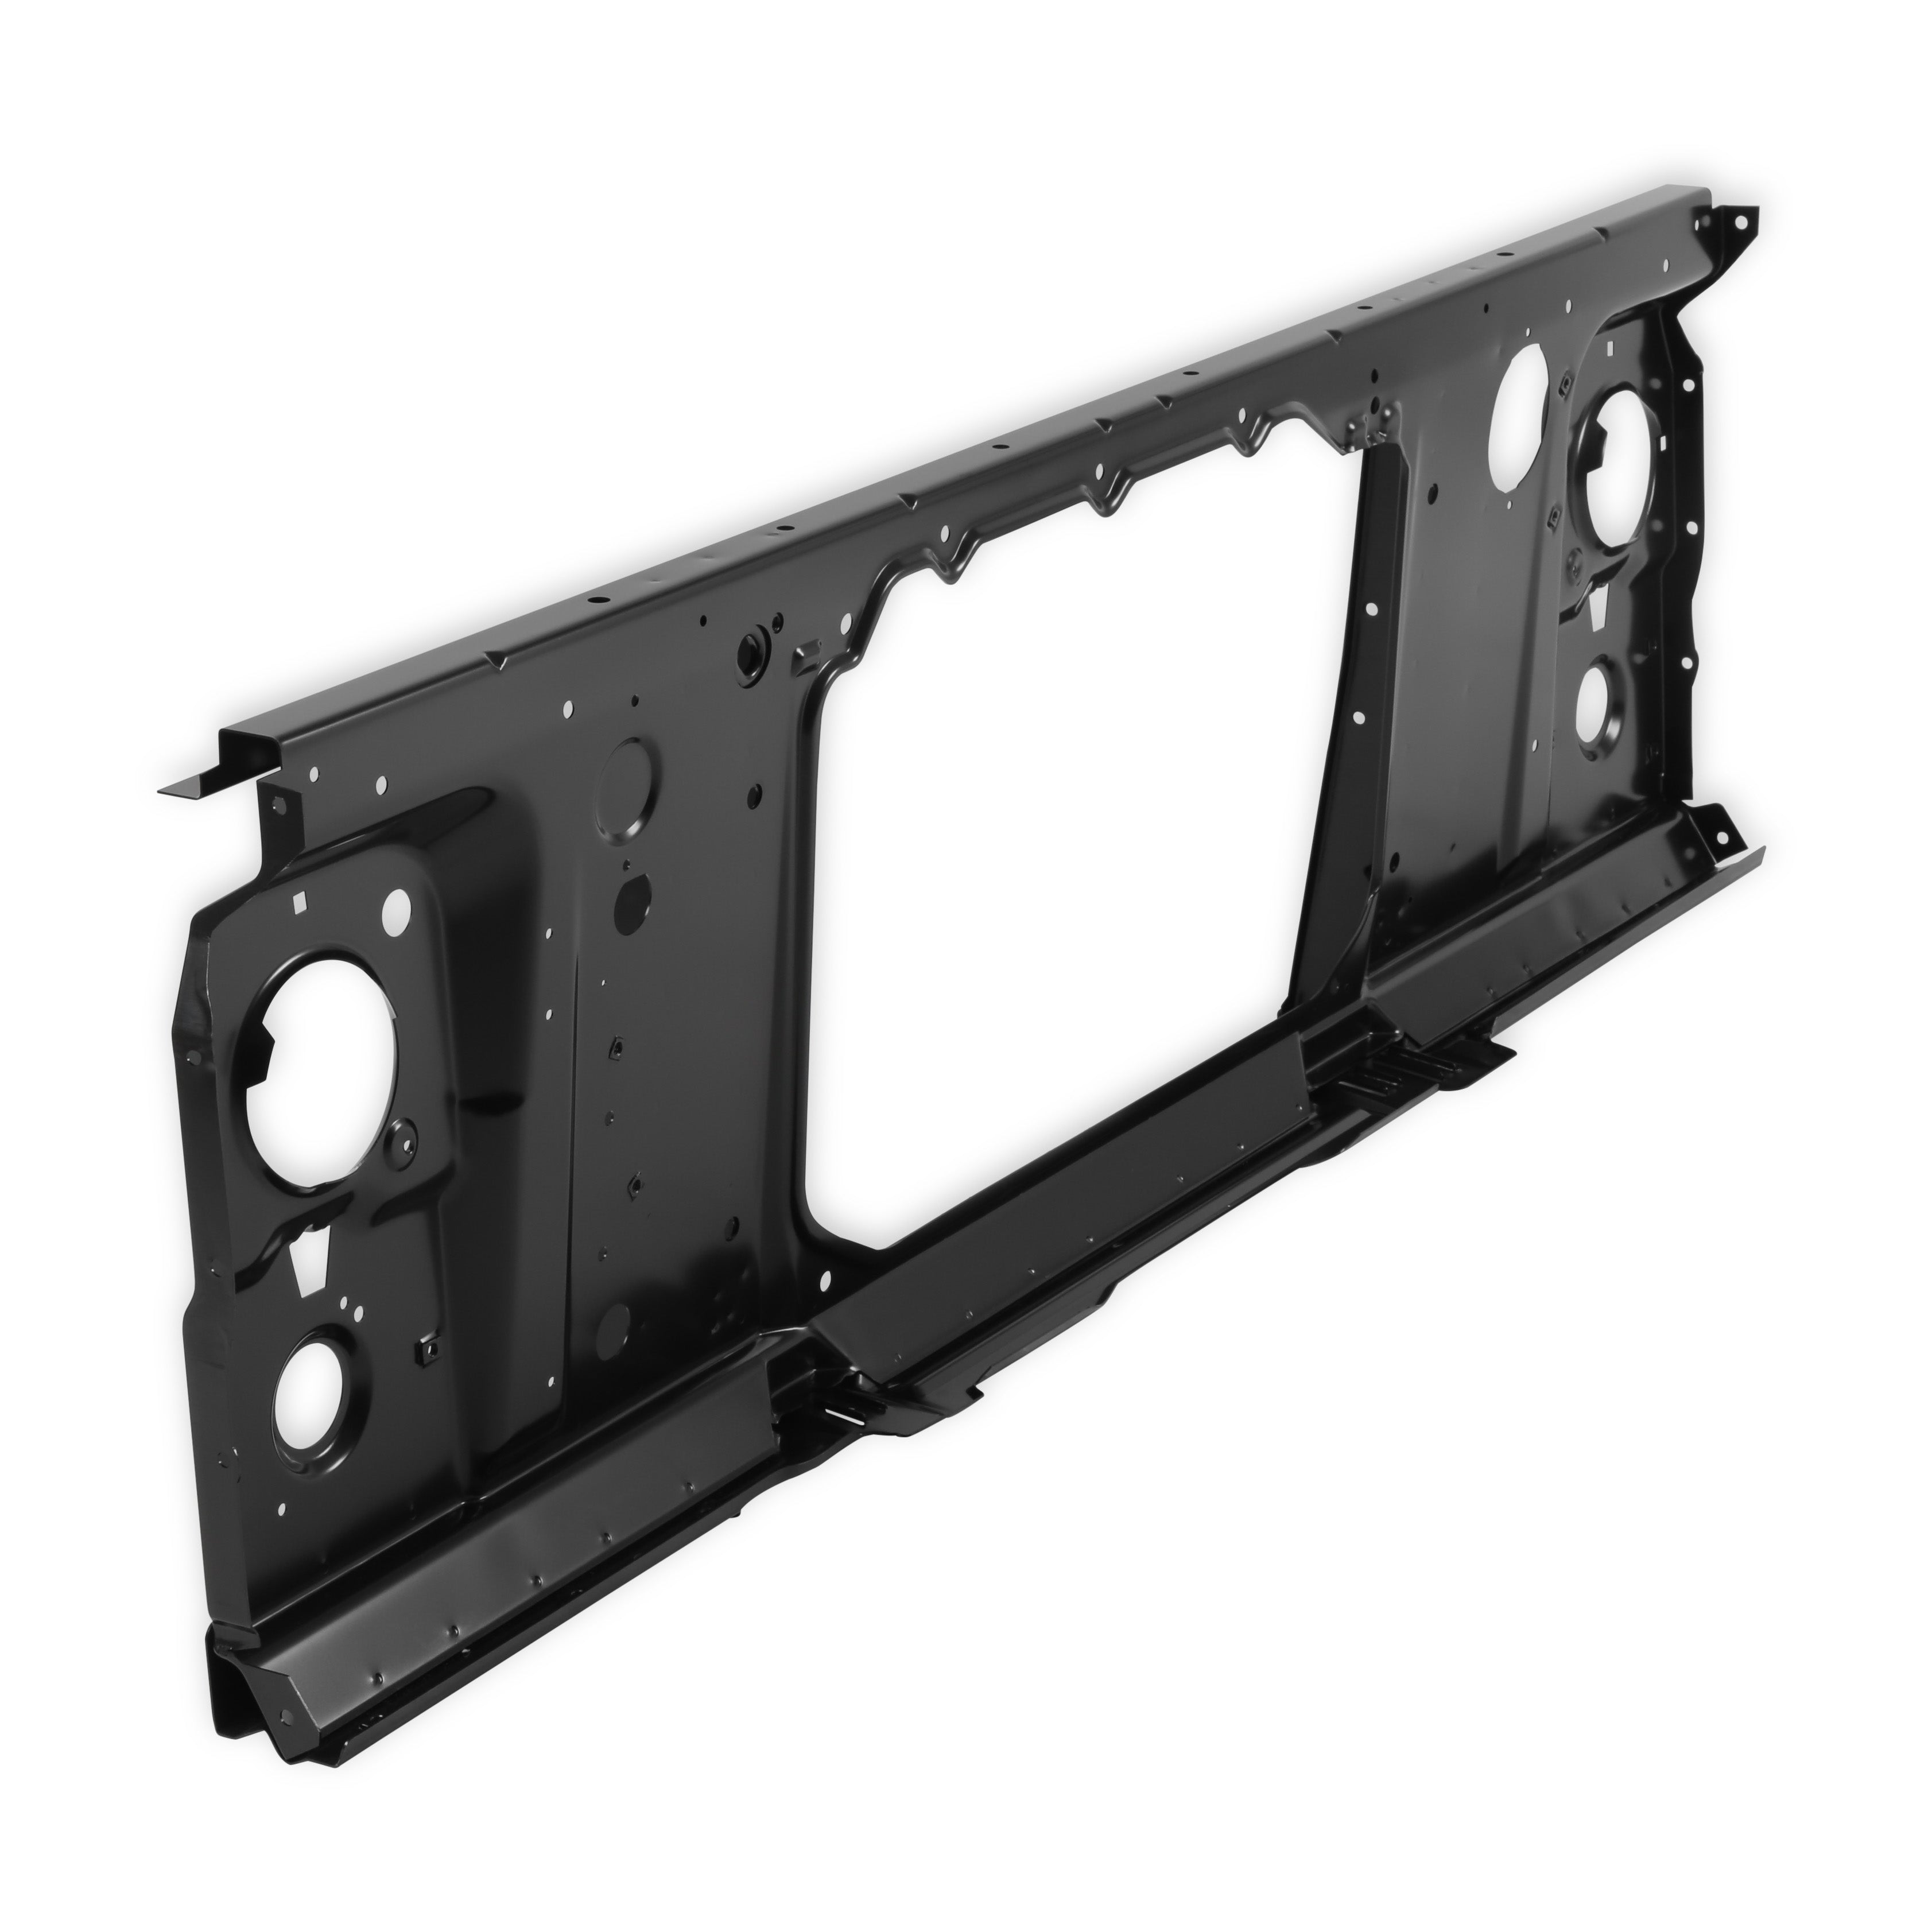 BROTHERS Radiator Support 04-237